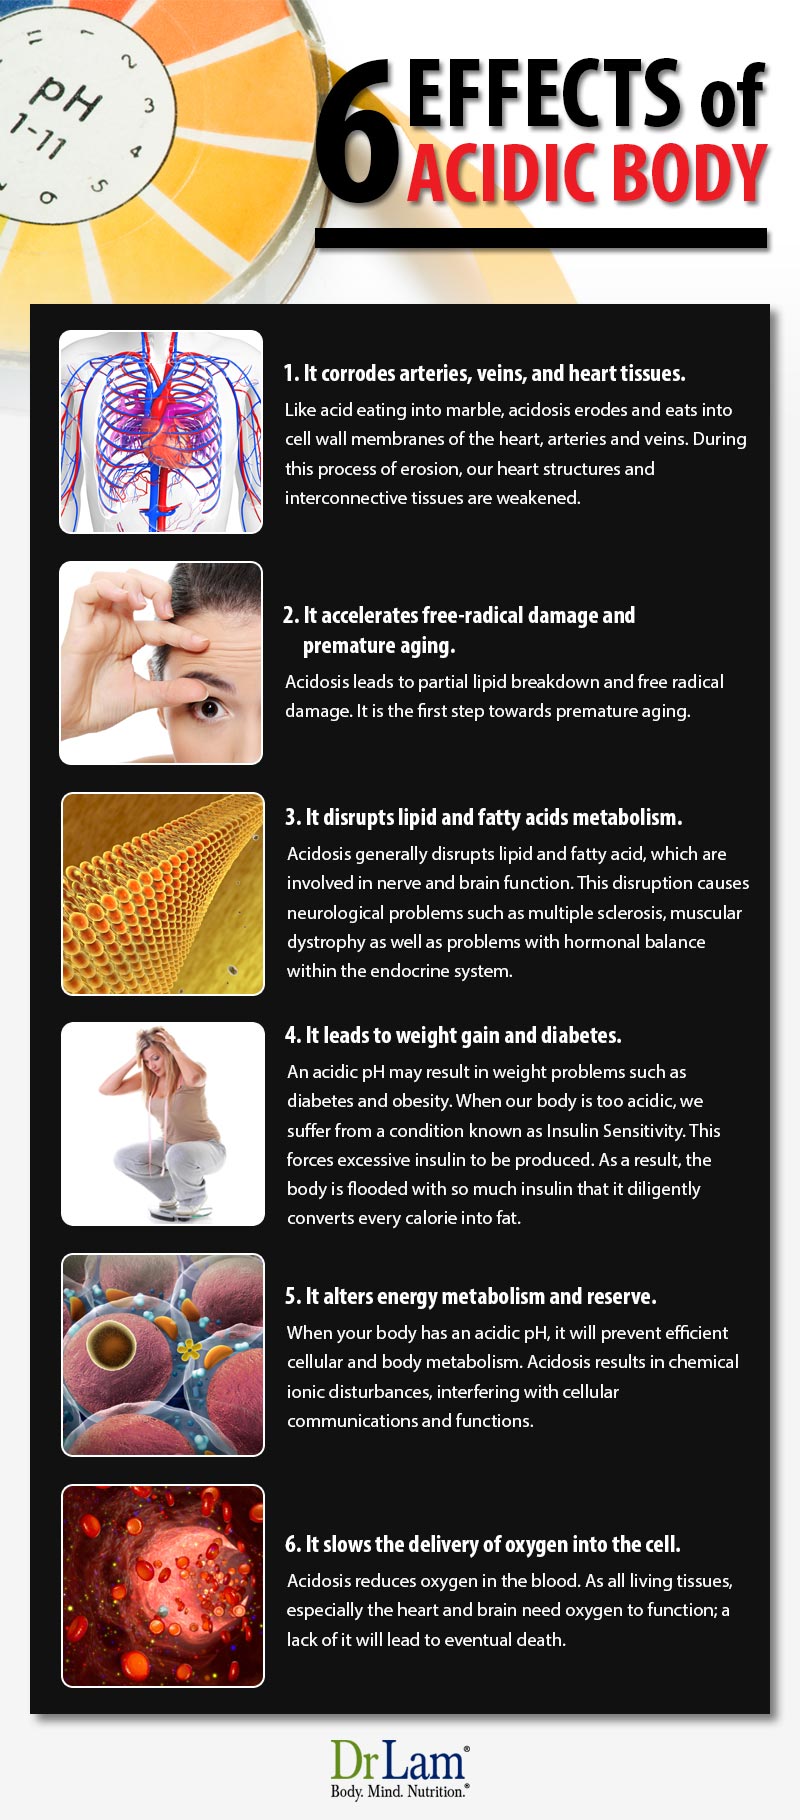 Check out this easy to understand infographic about the 6 effects of acidic body